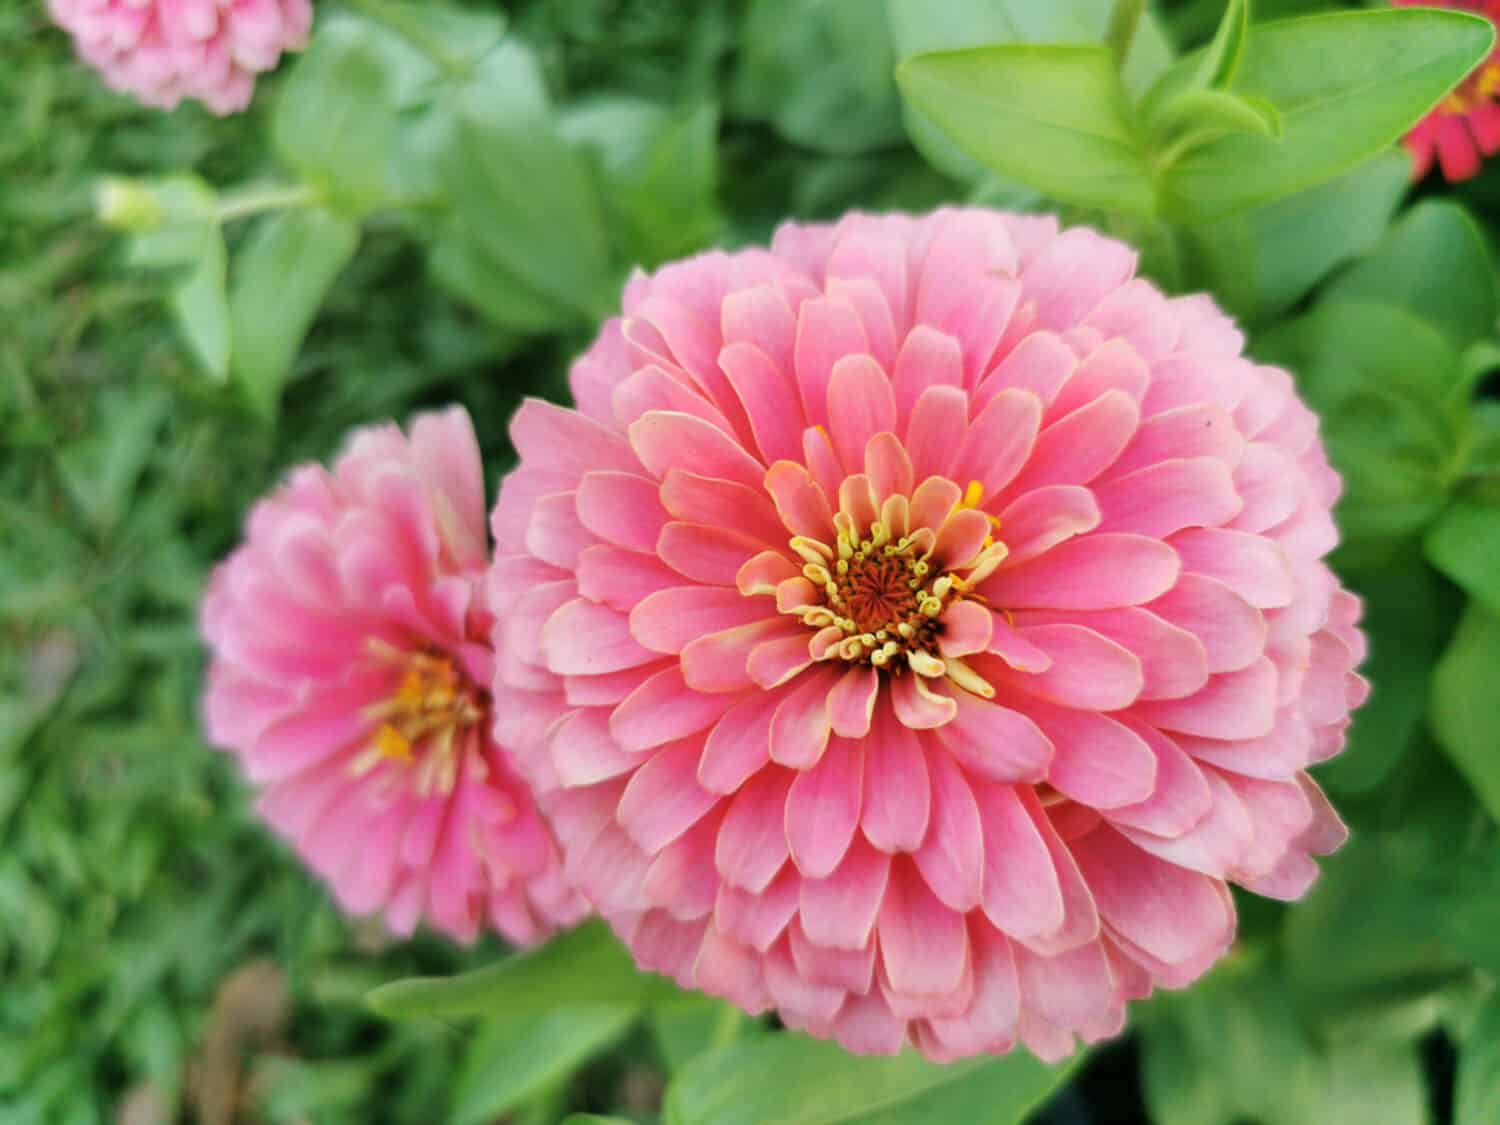 Zinnia​ is​ herbaceous​ plant​ with​ flowers​ in​ many​ color​s​ such​ as​ red​, pink, white, orange, purple​ Zinnia​ flower​s​ are​ dried​ and​ ground​ into​ a​ power​ for​ making​ tea​